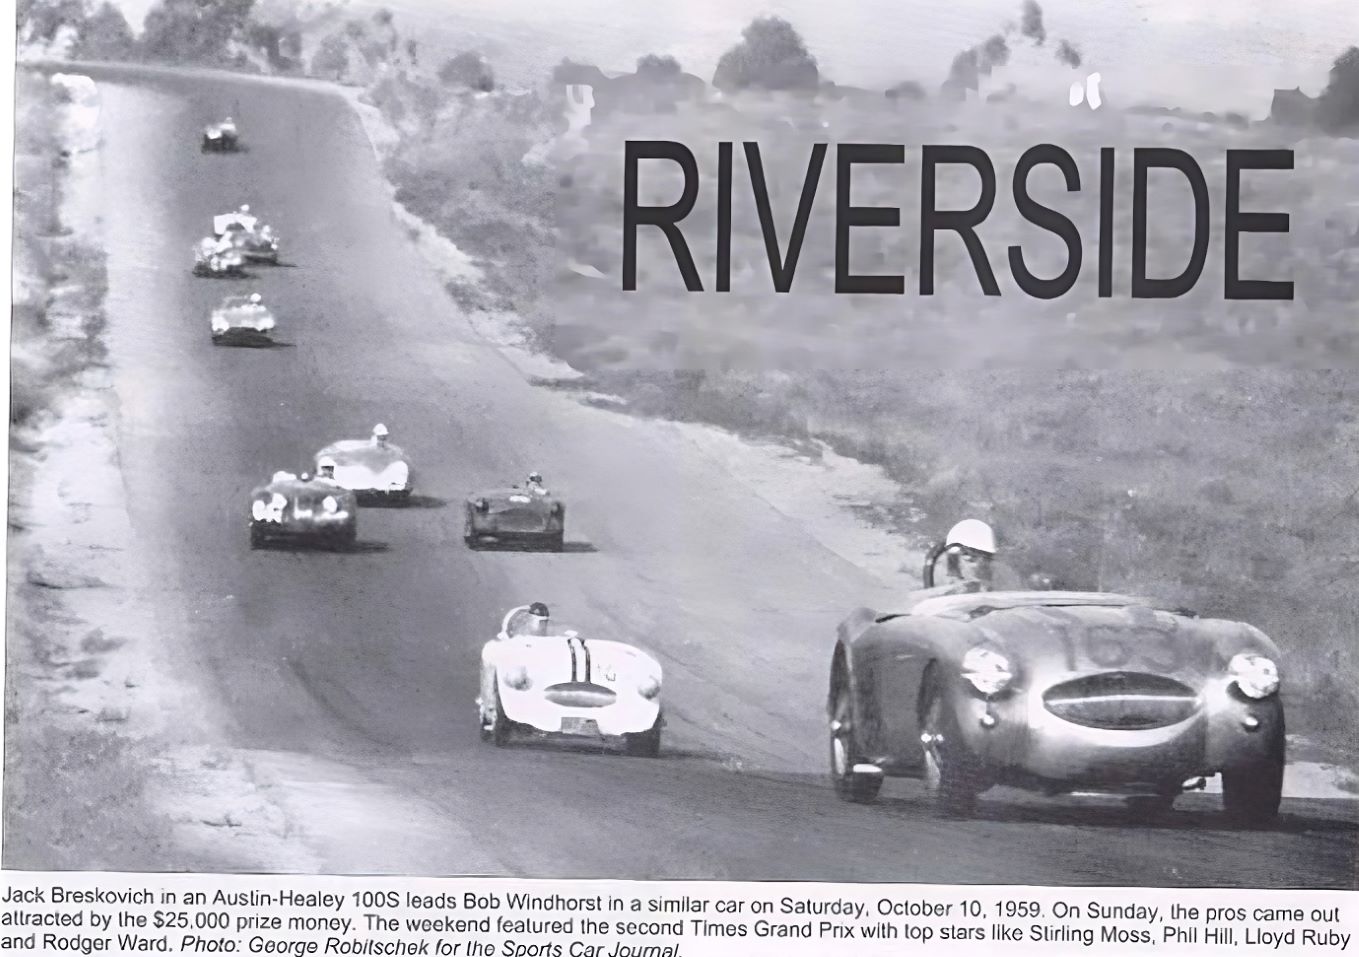 Name:  AH 100S #401 AHS3709 Jack Beskovitch Riverside 3 hour race 1959 #163 w another 100S 174 kb arch .jpg
Views: 192
Size:  173.6 KB